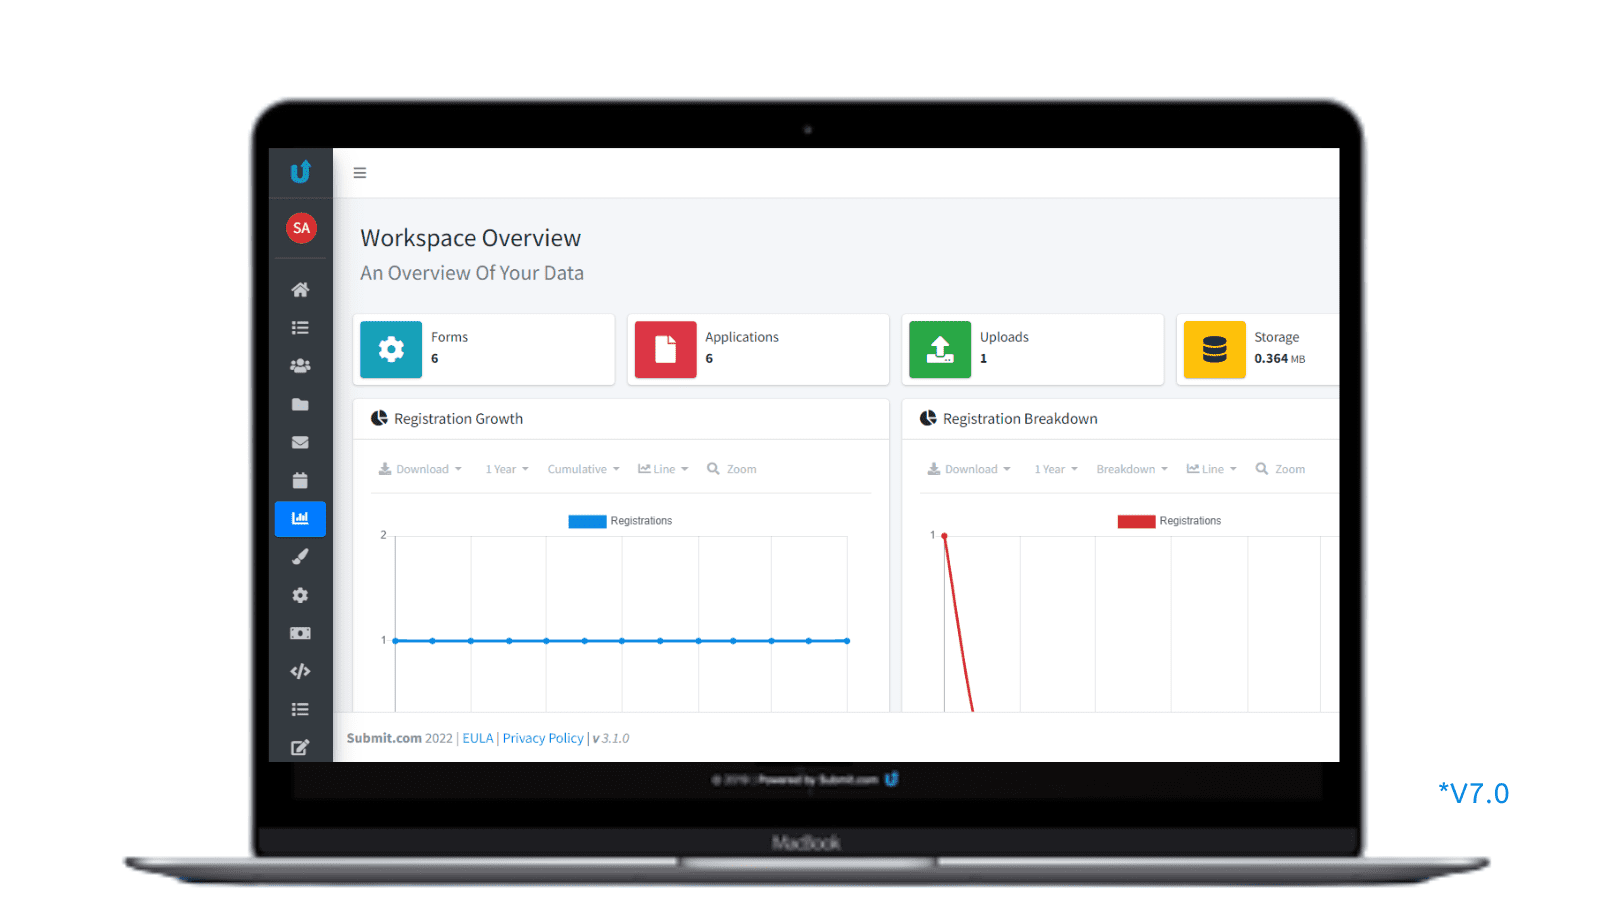 Submit.com’s workflow management software interface